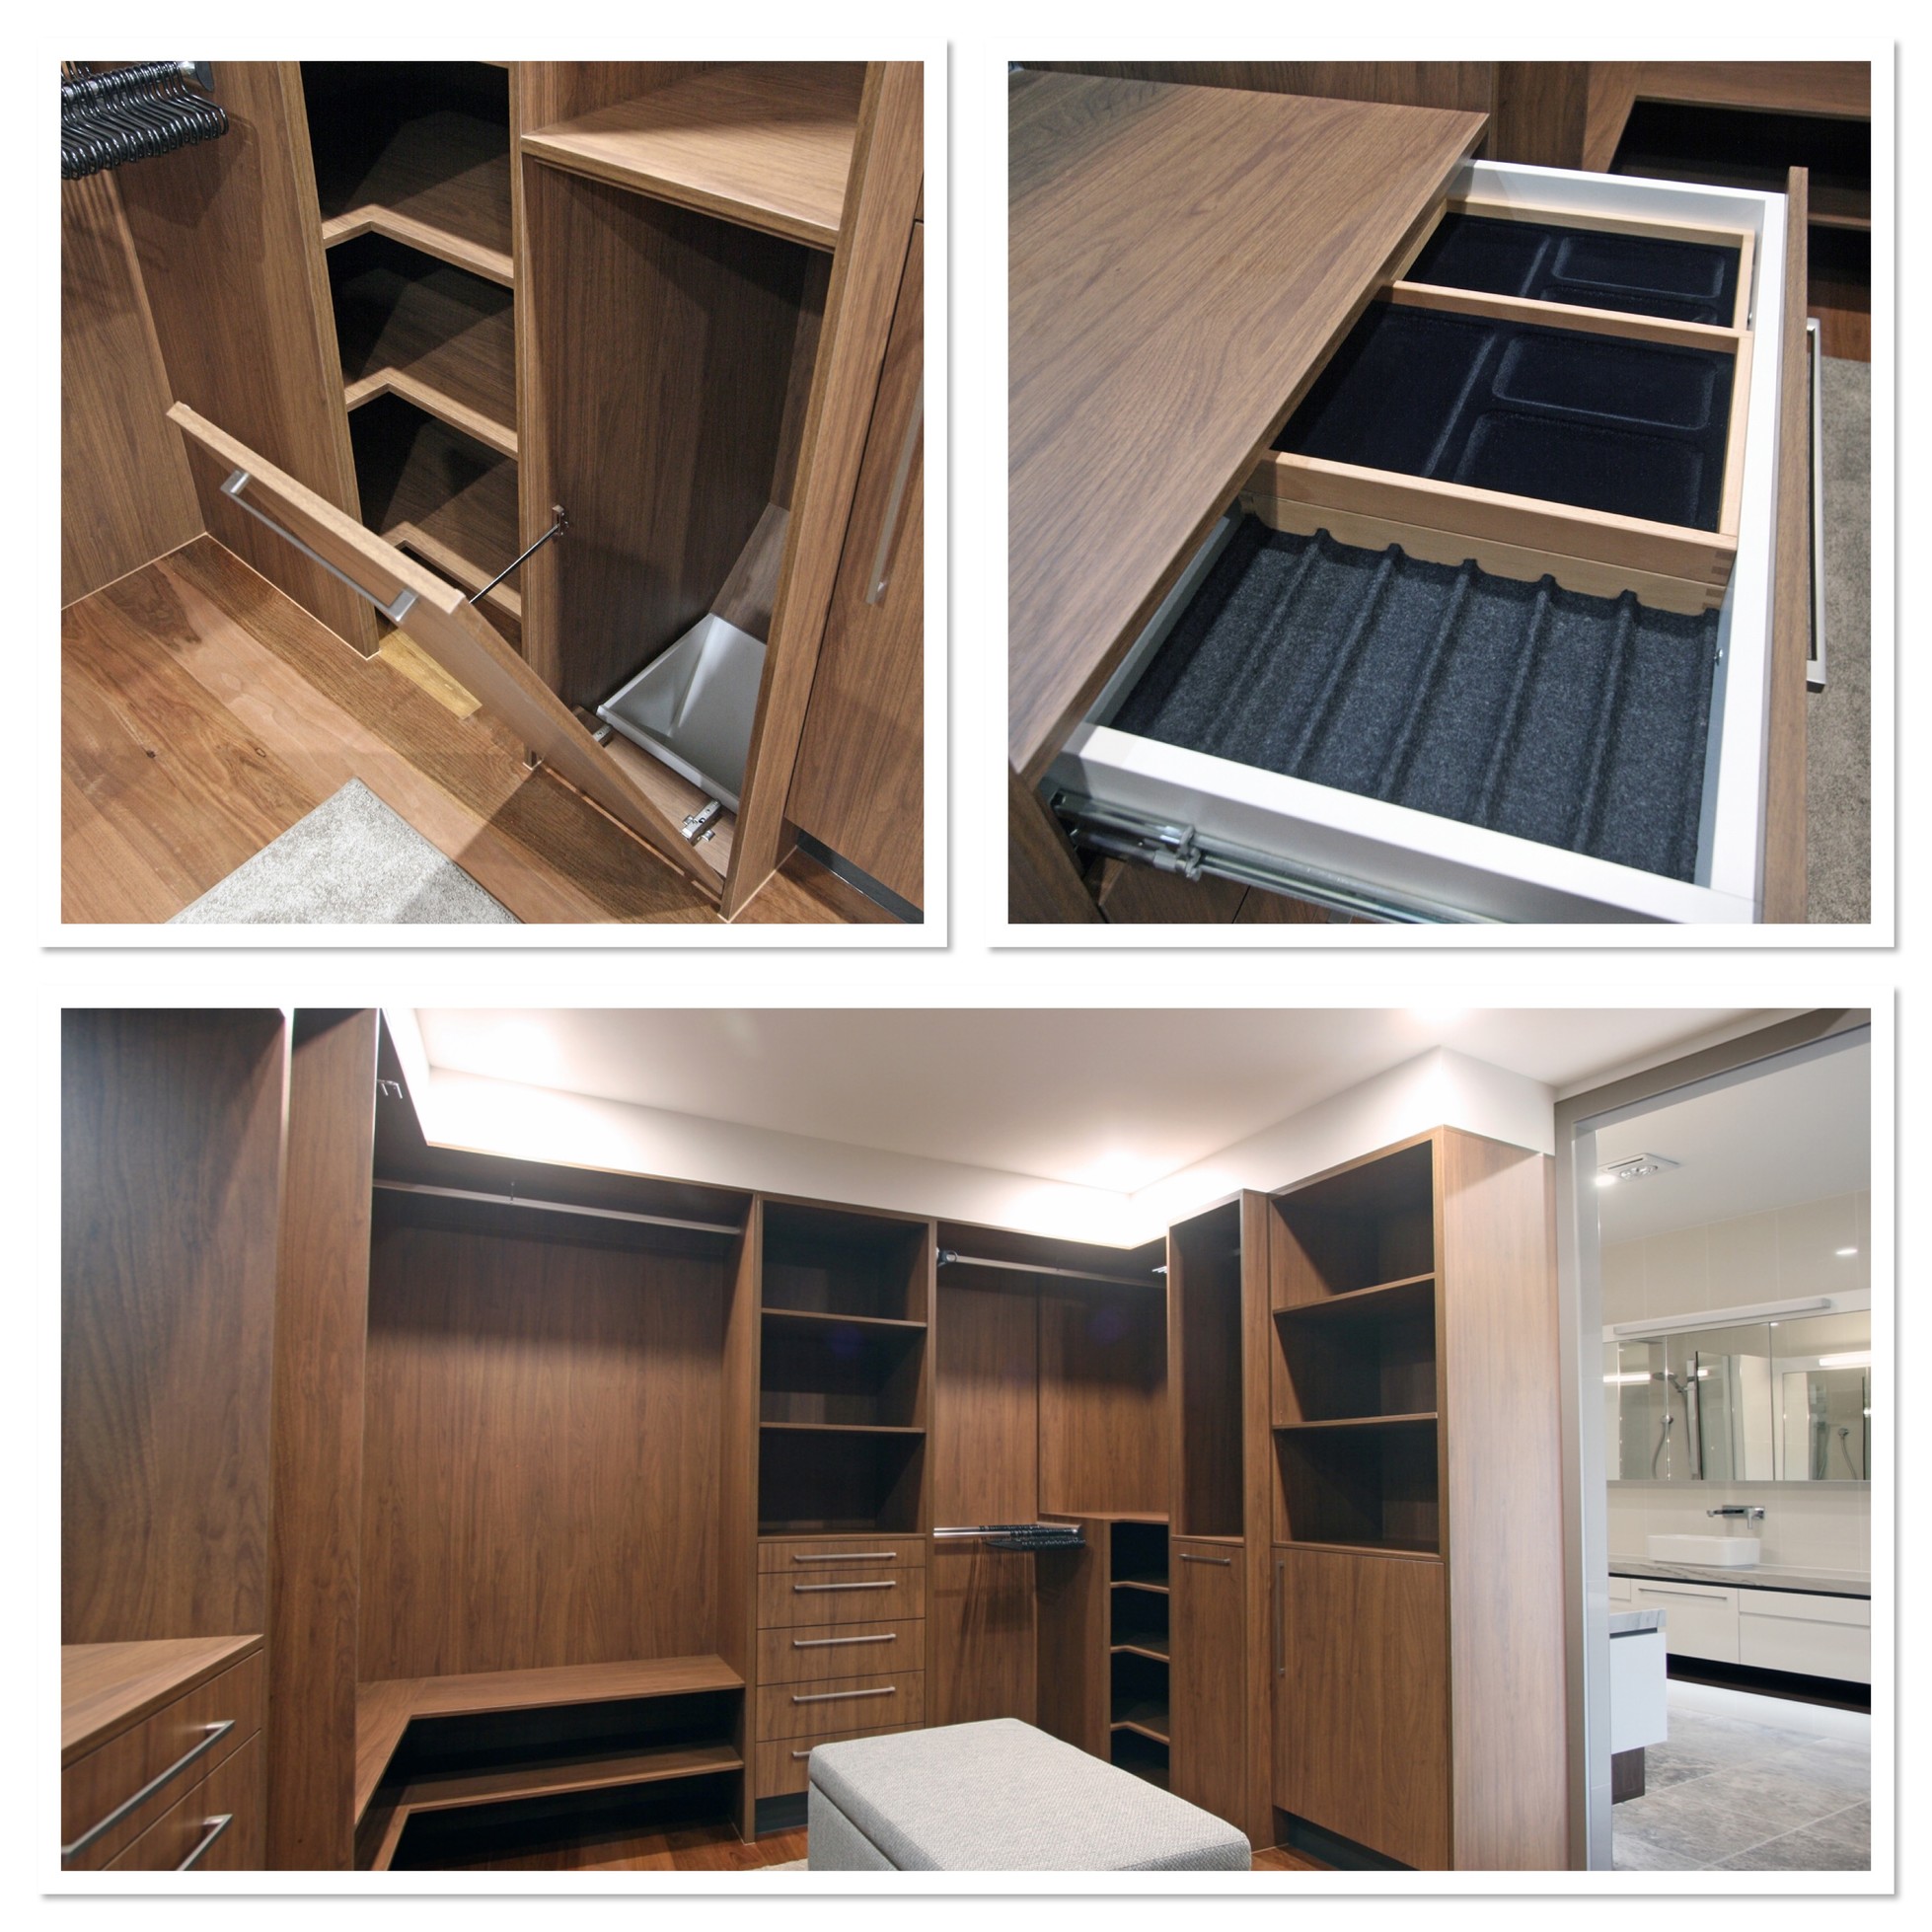 Walk in robe cabinetry